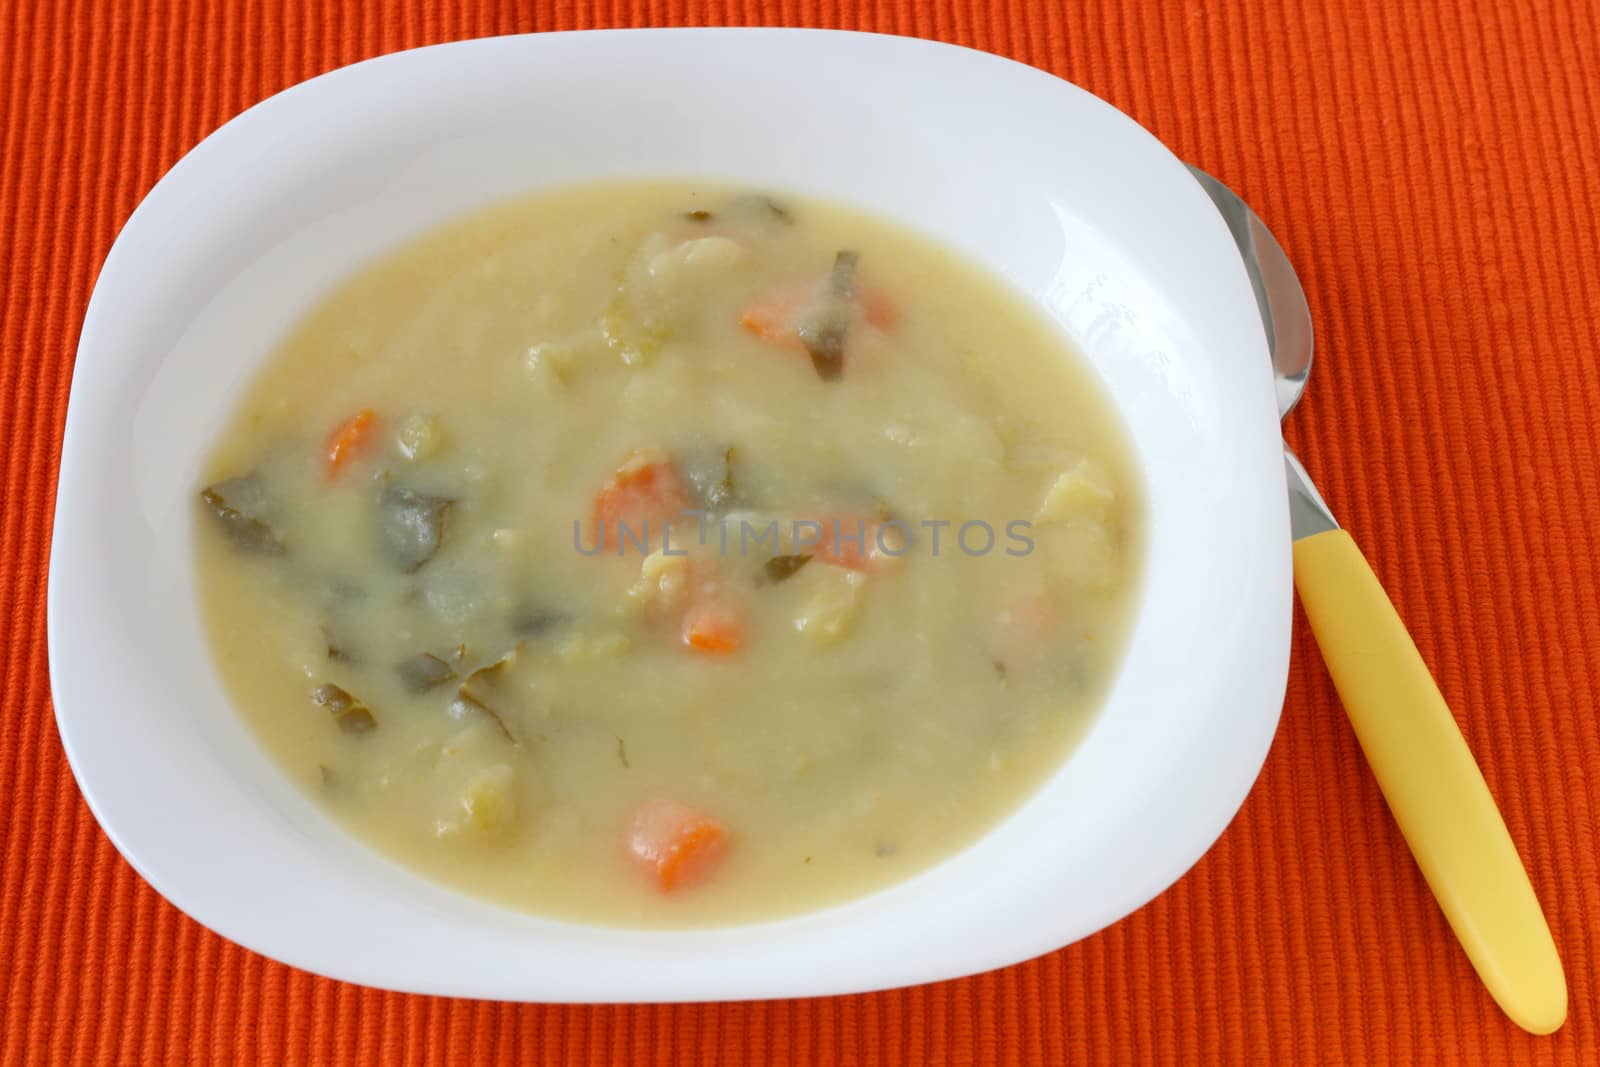 vegetable soup in the plate